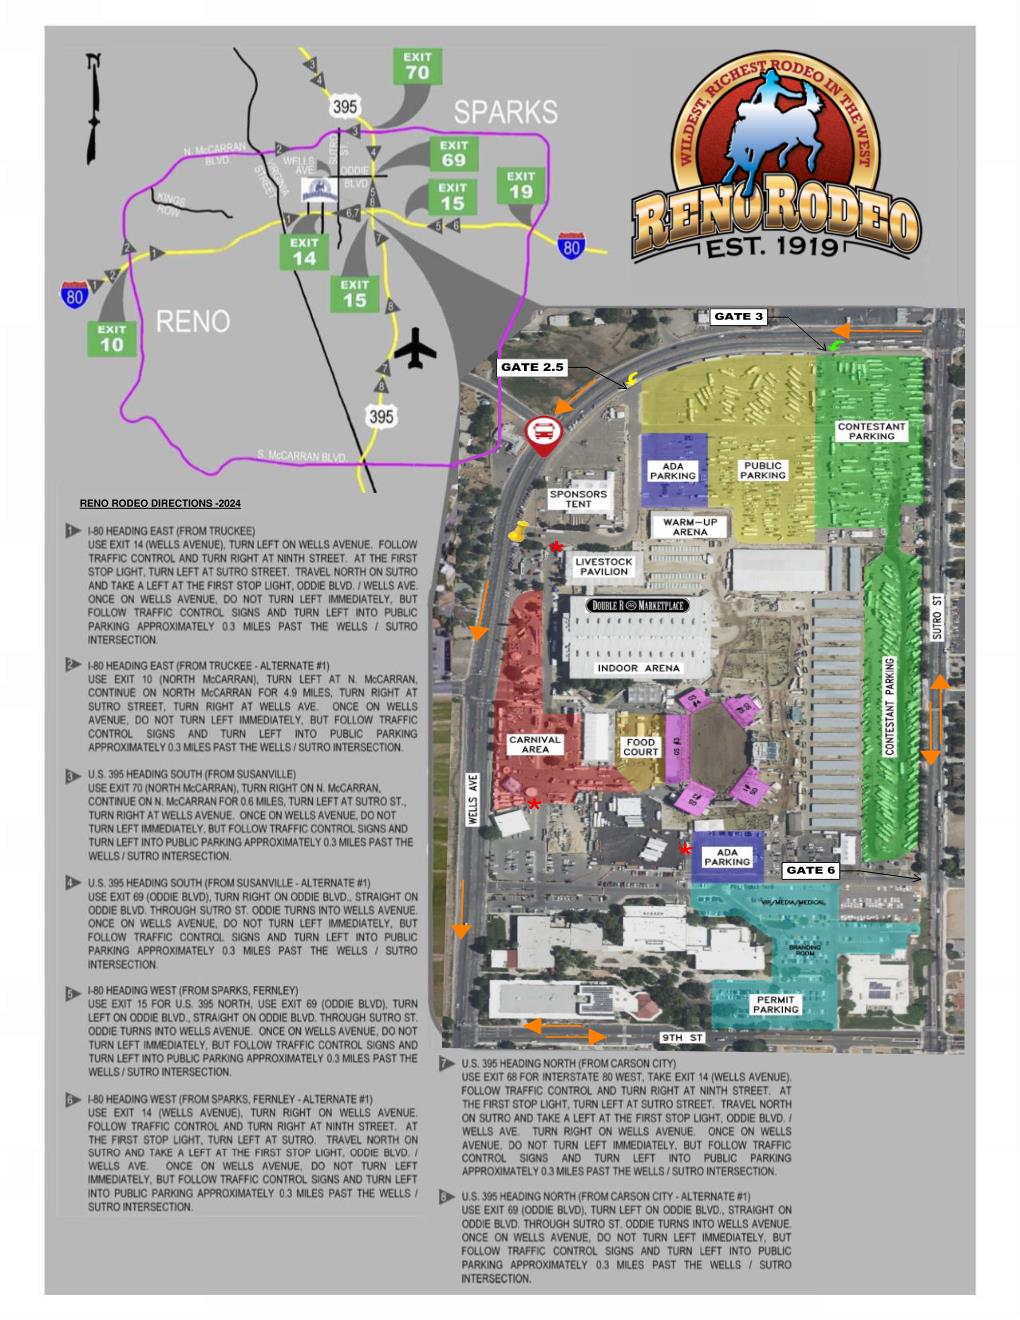 Reno Rodeo Directions